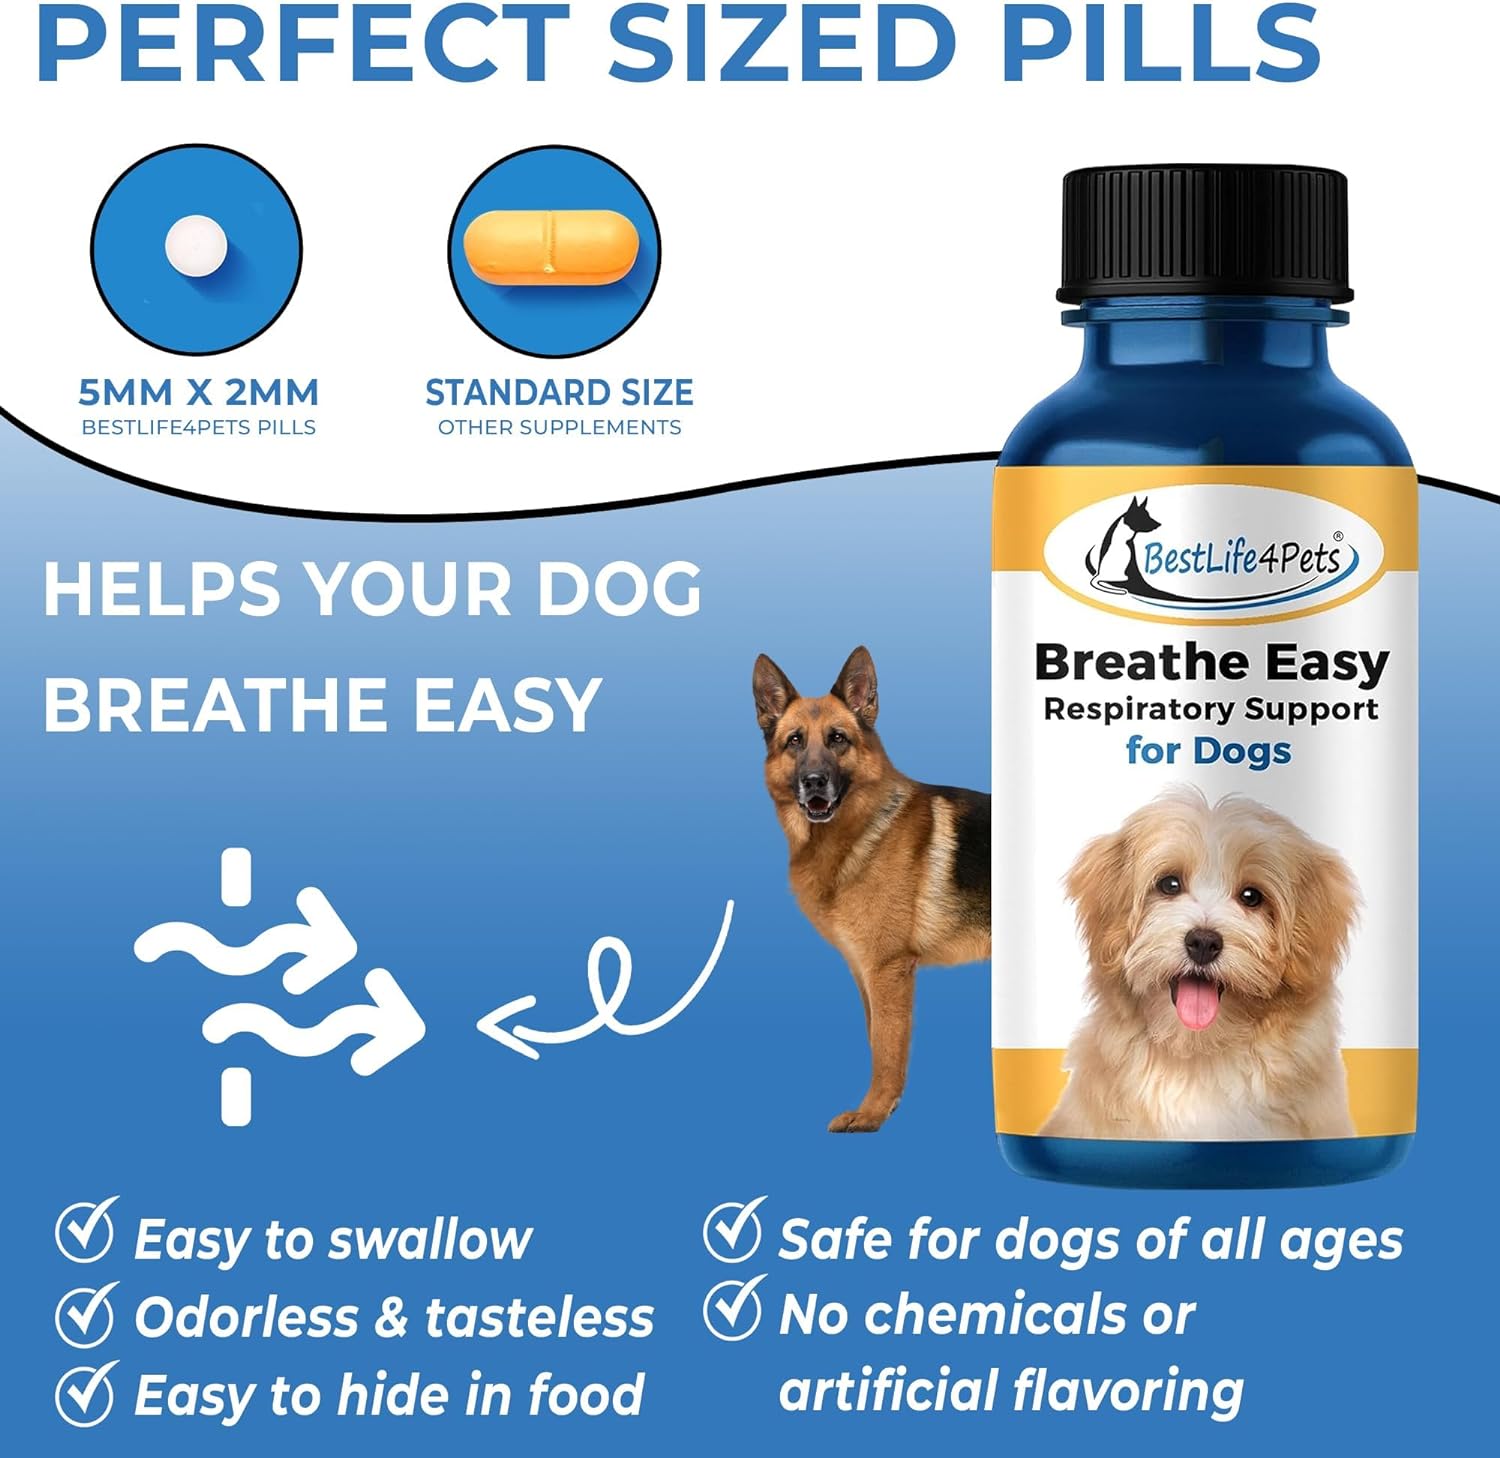 BestLife4Pets Kennel Cough & Respiratory Remedy - Breathe Easy Natural Support for Dog Sneezing, Wheezing, Runny Nose, Cough - Canine Respiratory Infection Relief - 400 Odorless, Tasteless Pills : BestLife4Pets : Pet Supplies